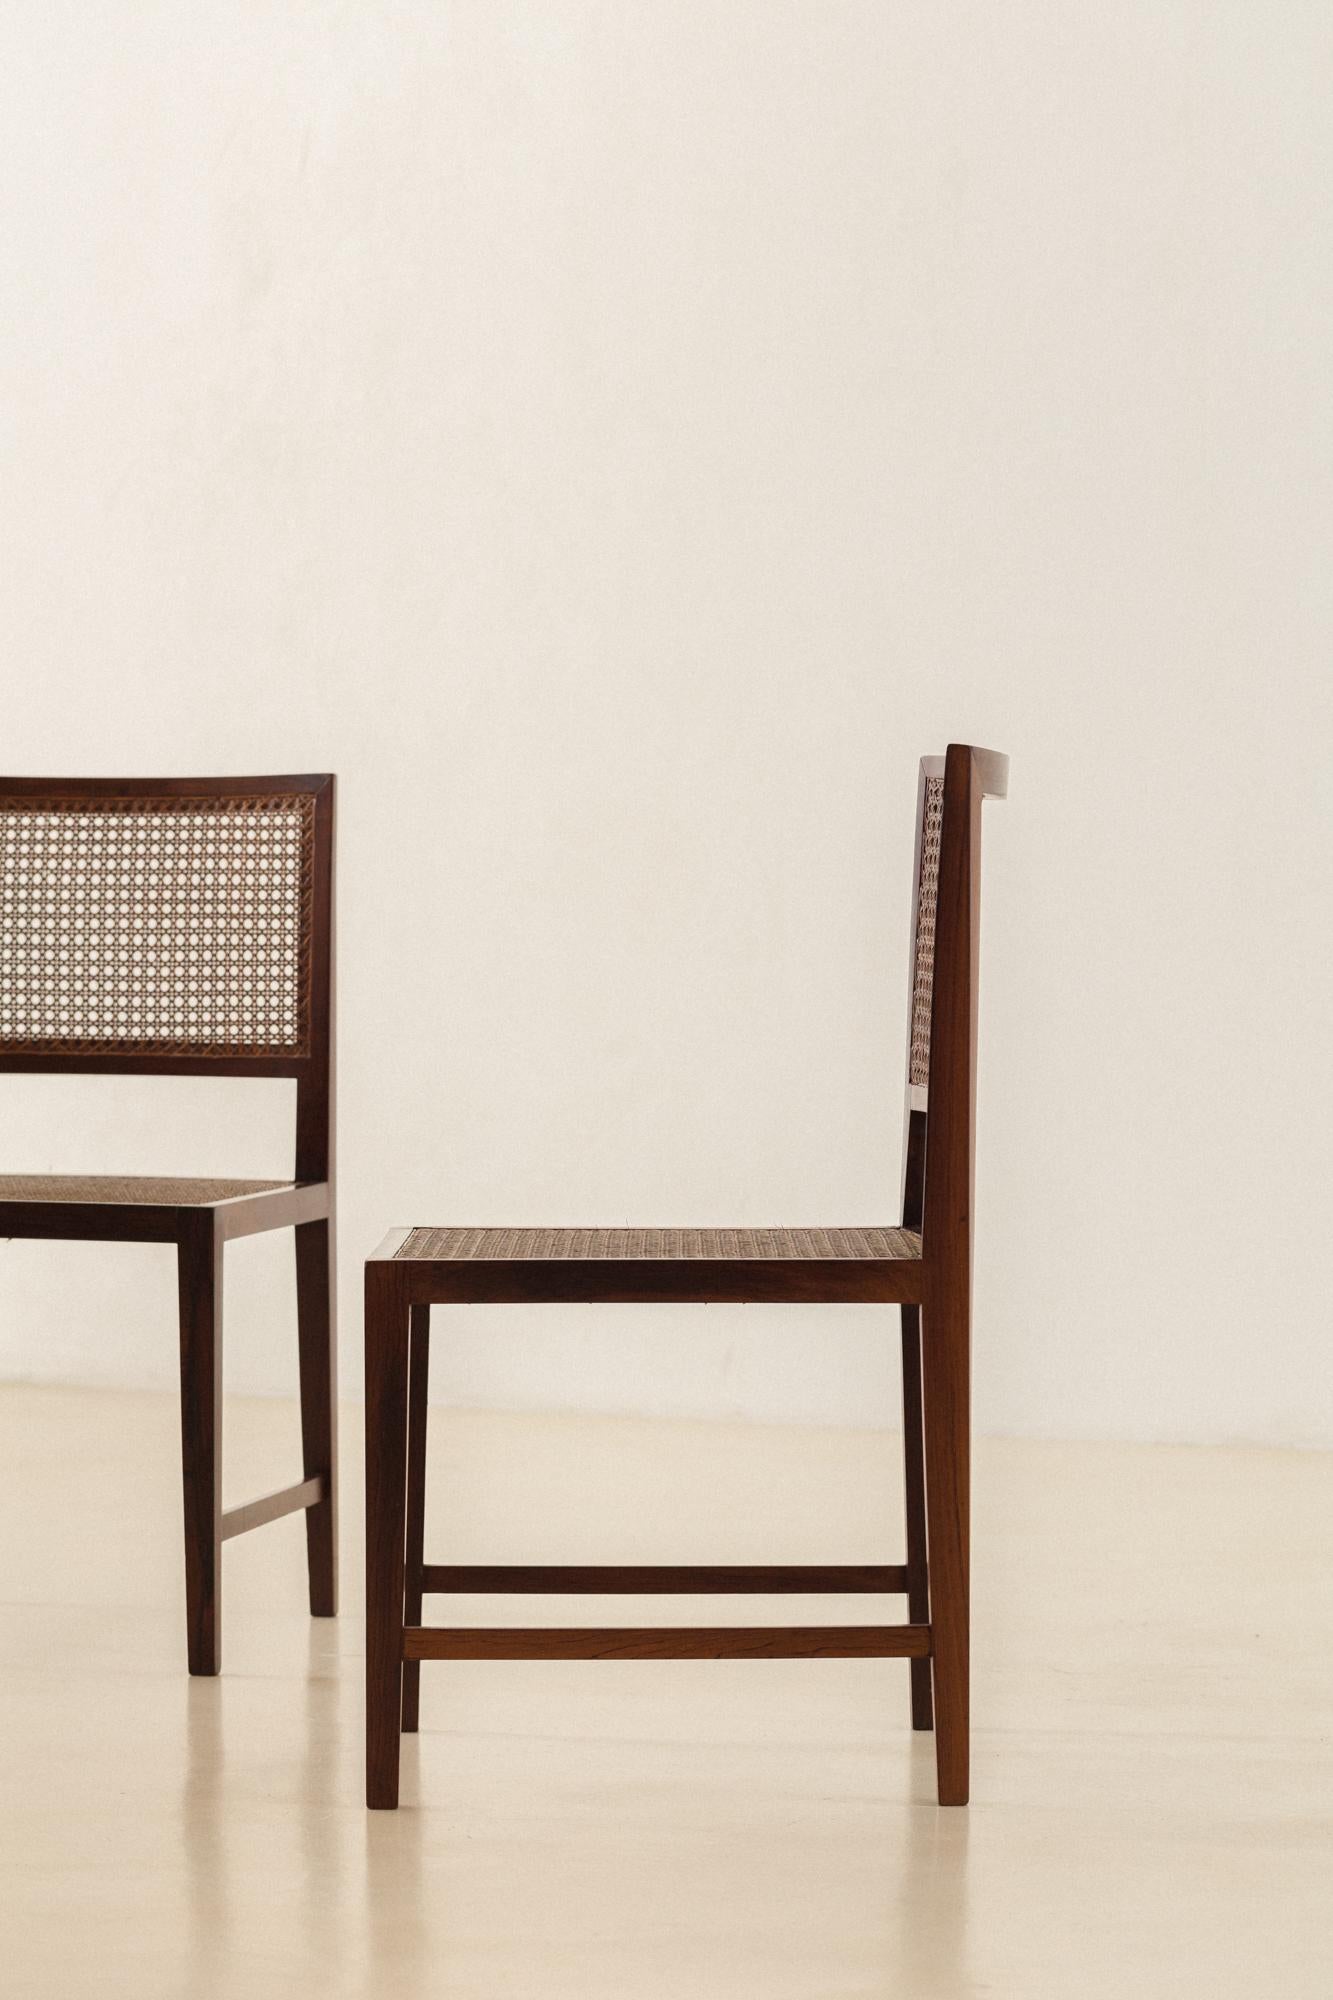 Straw Rosewood and Cane Dining Chairs, M.L. Magalhães, 1960s, Midcentury Brazilian